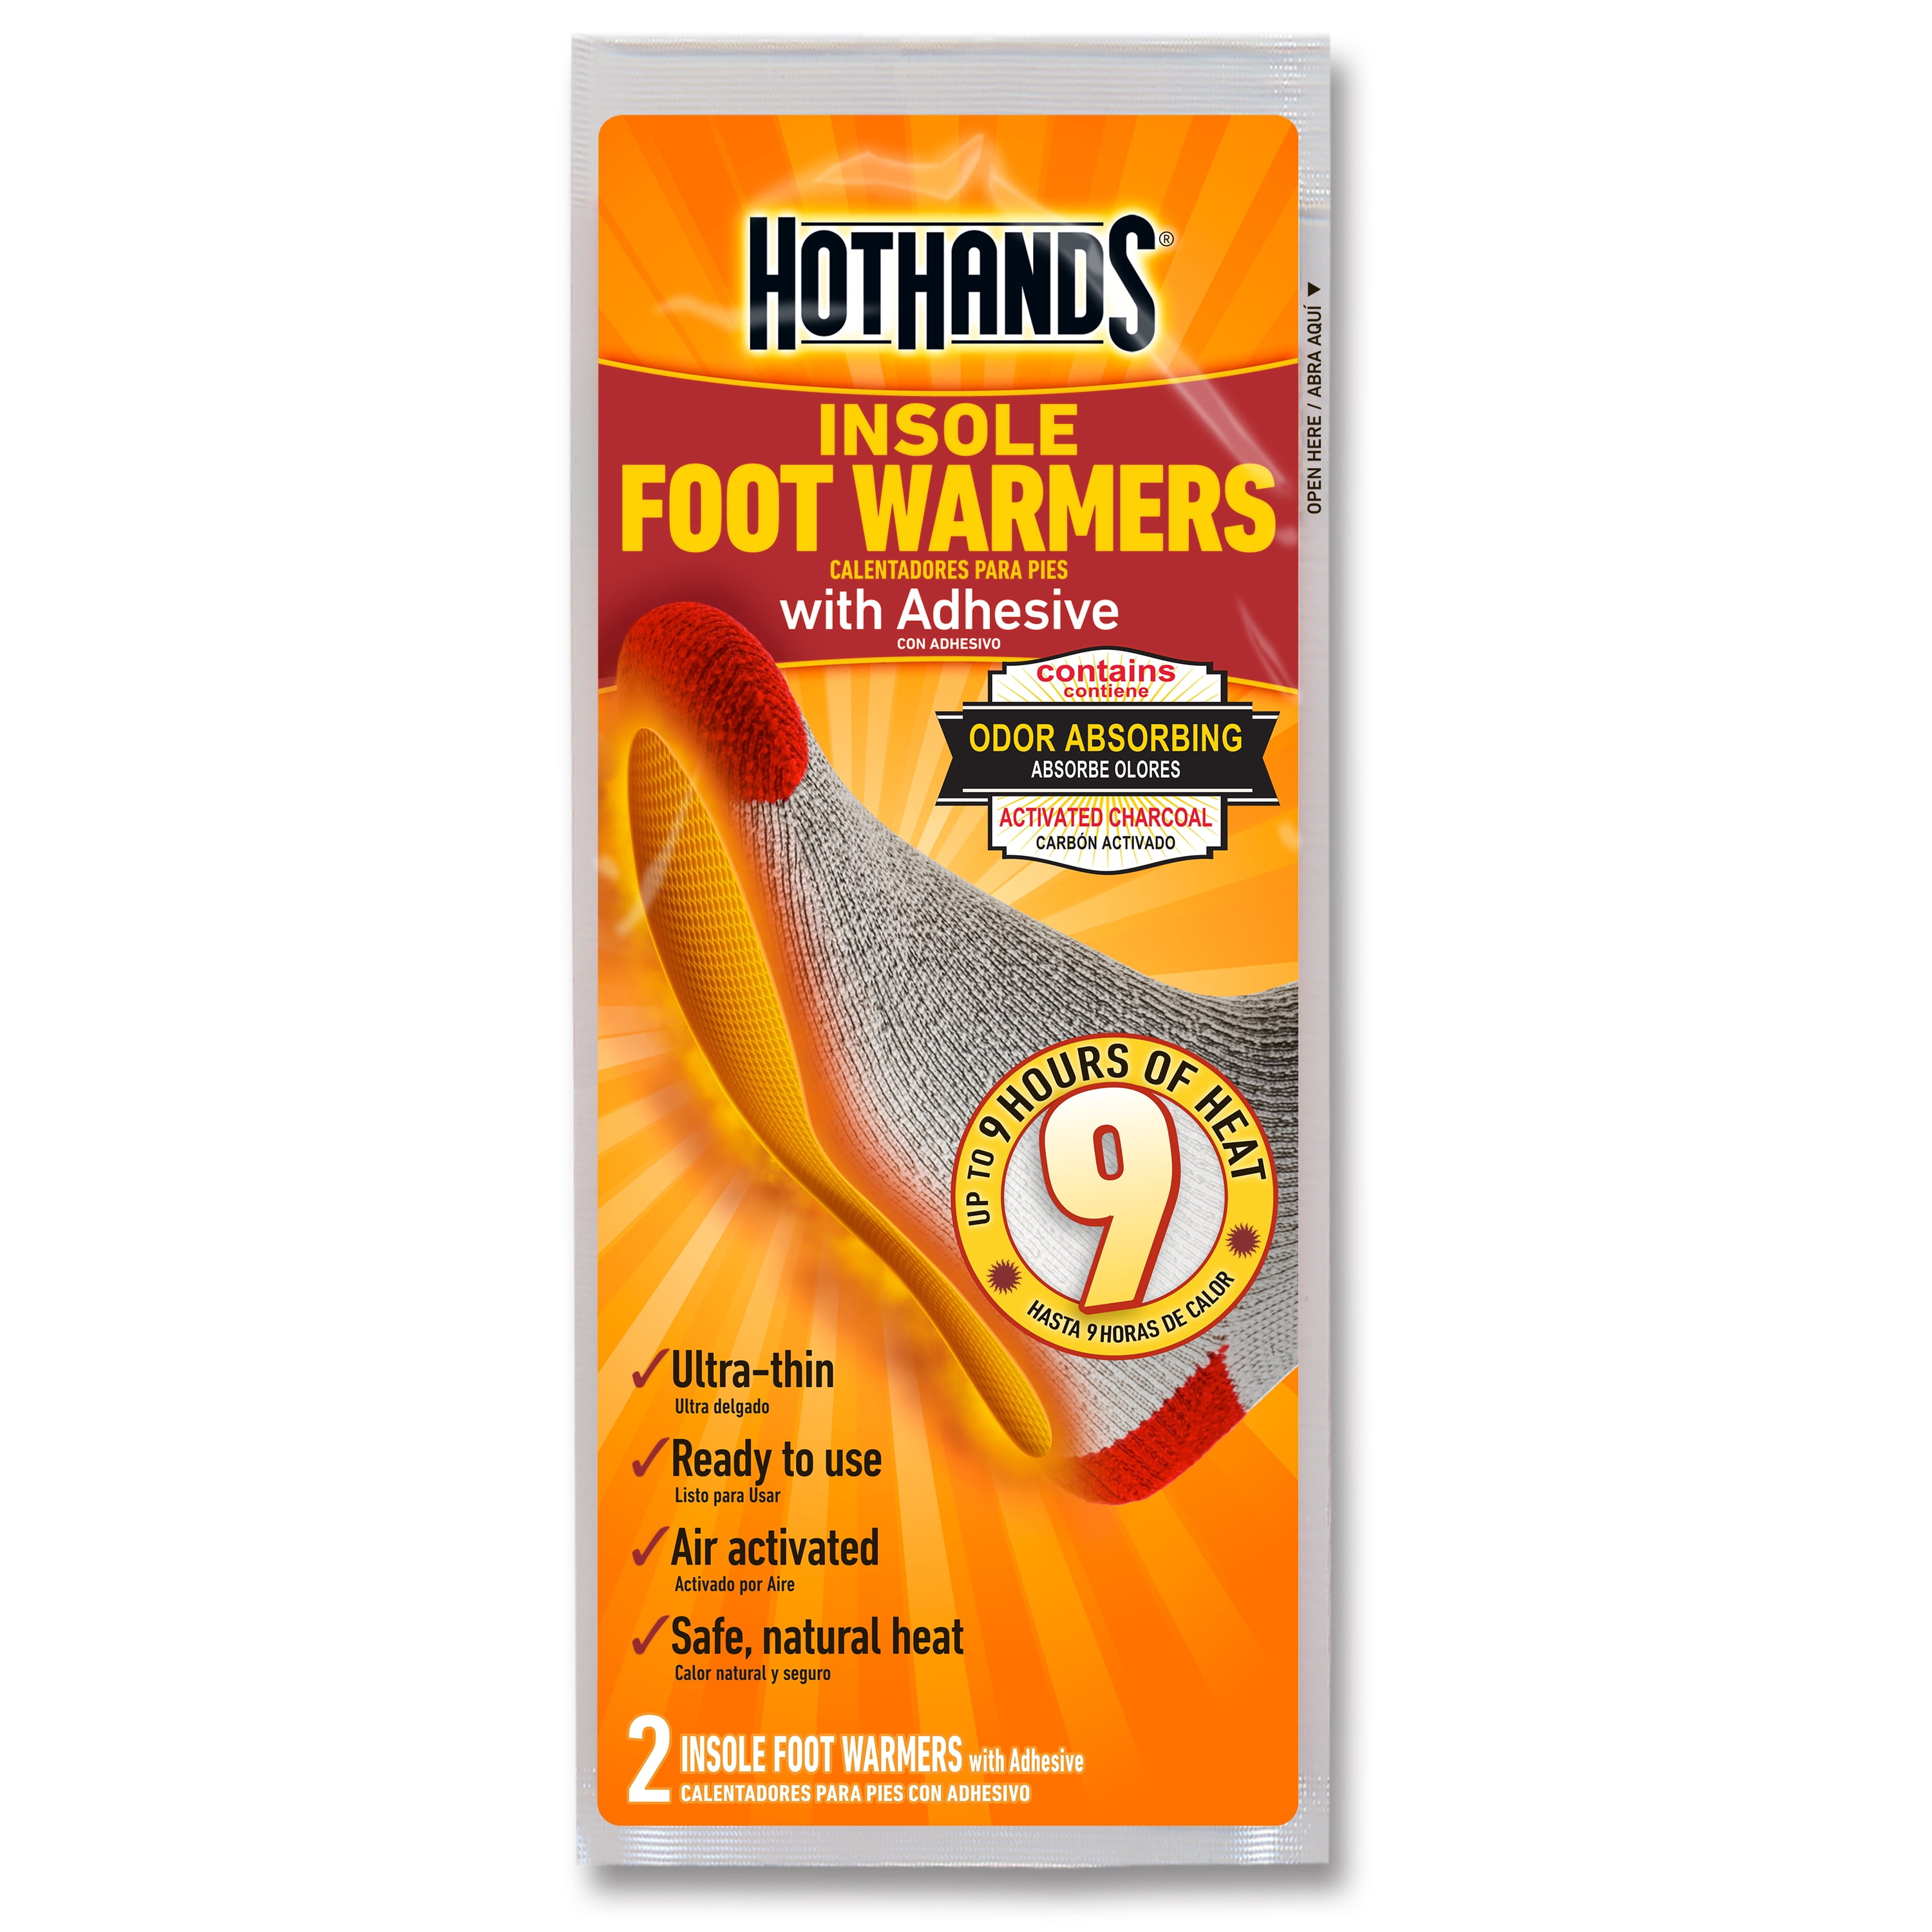 HotHands Insole Foot Warmers Lot 10 Packs 